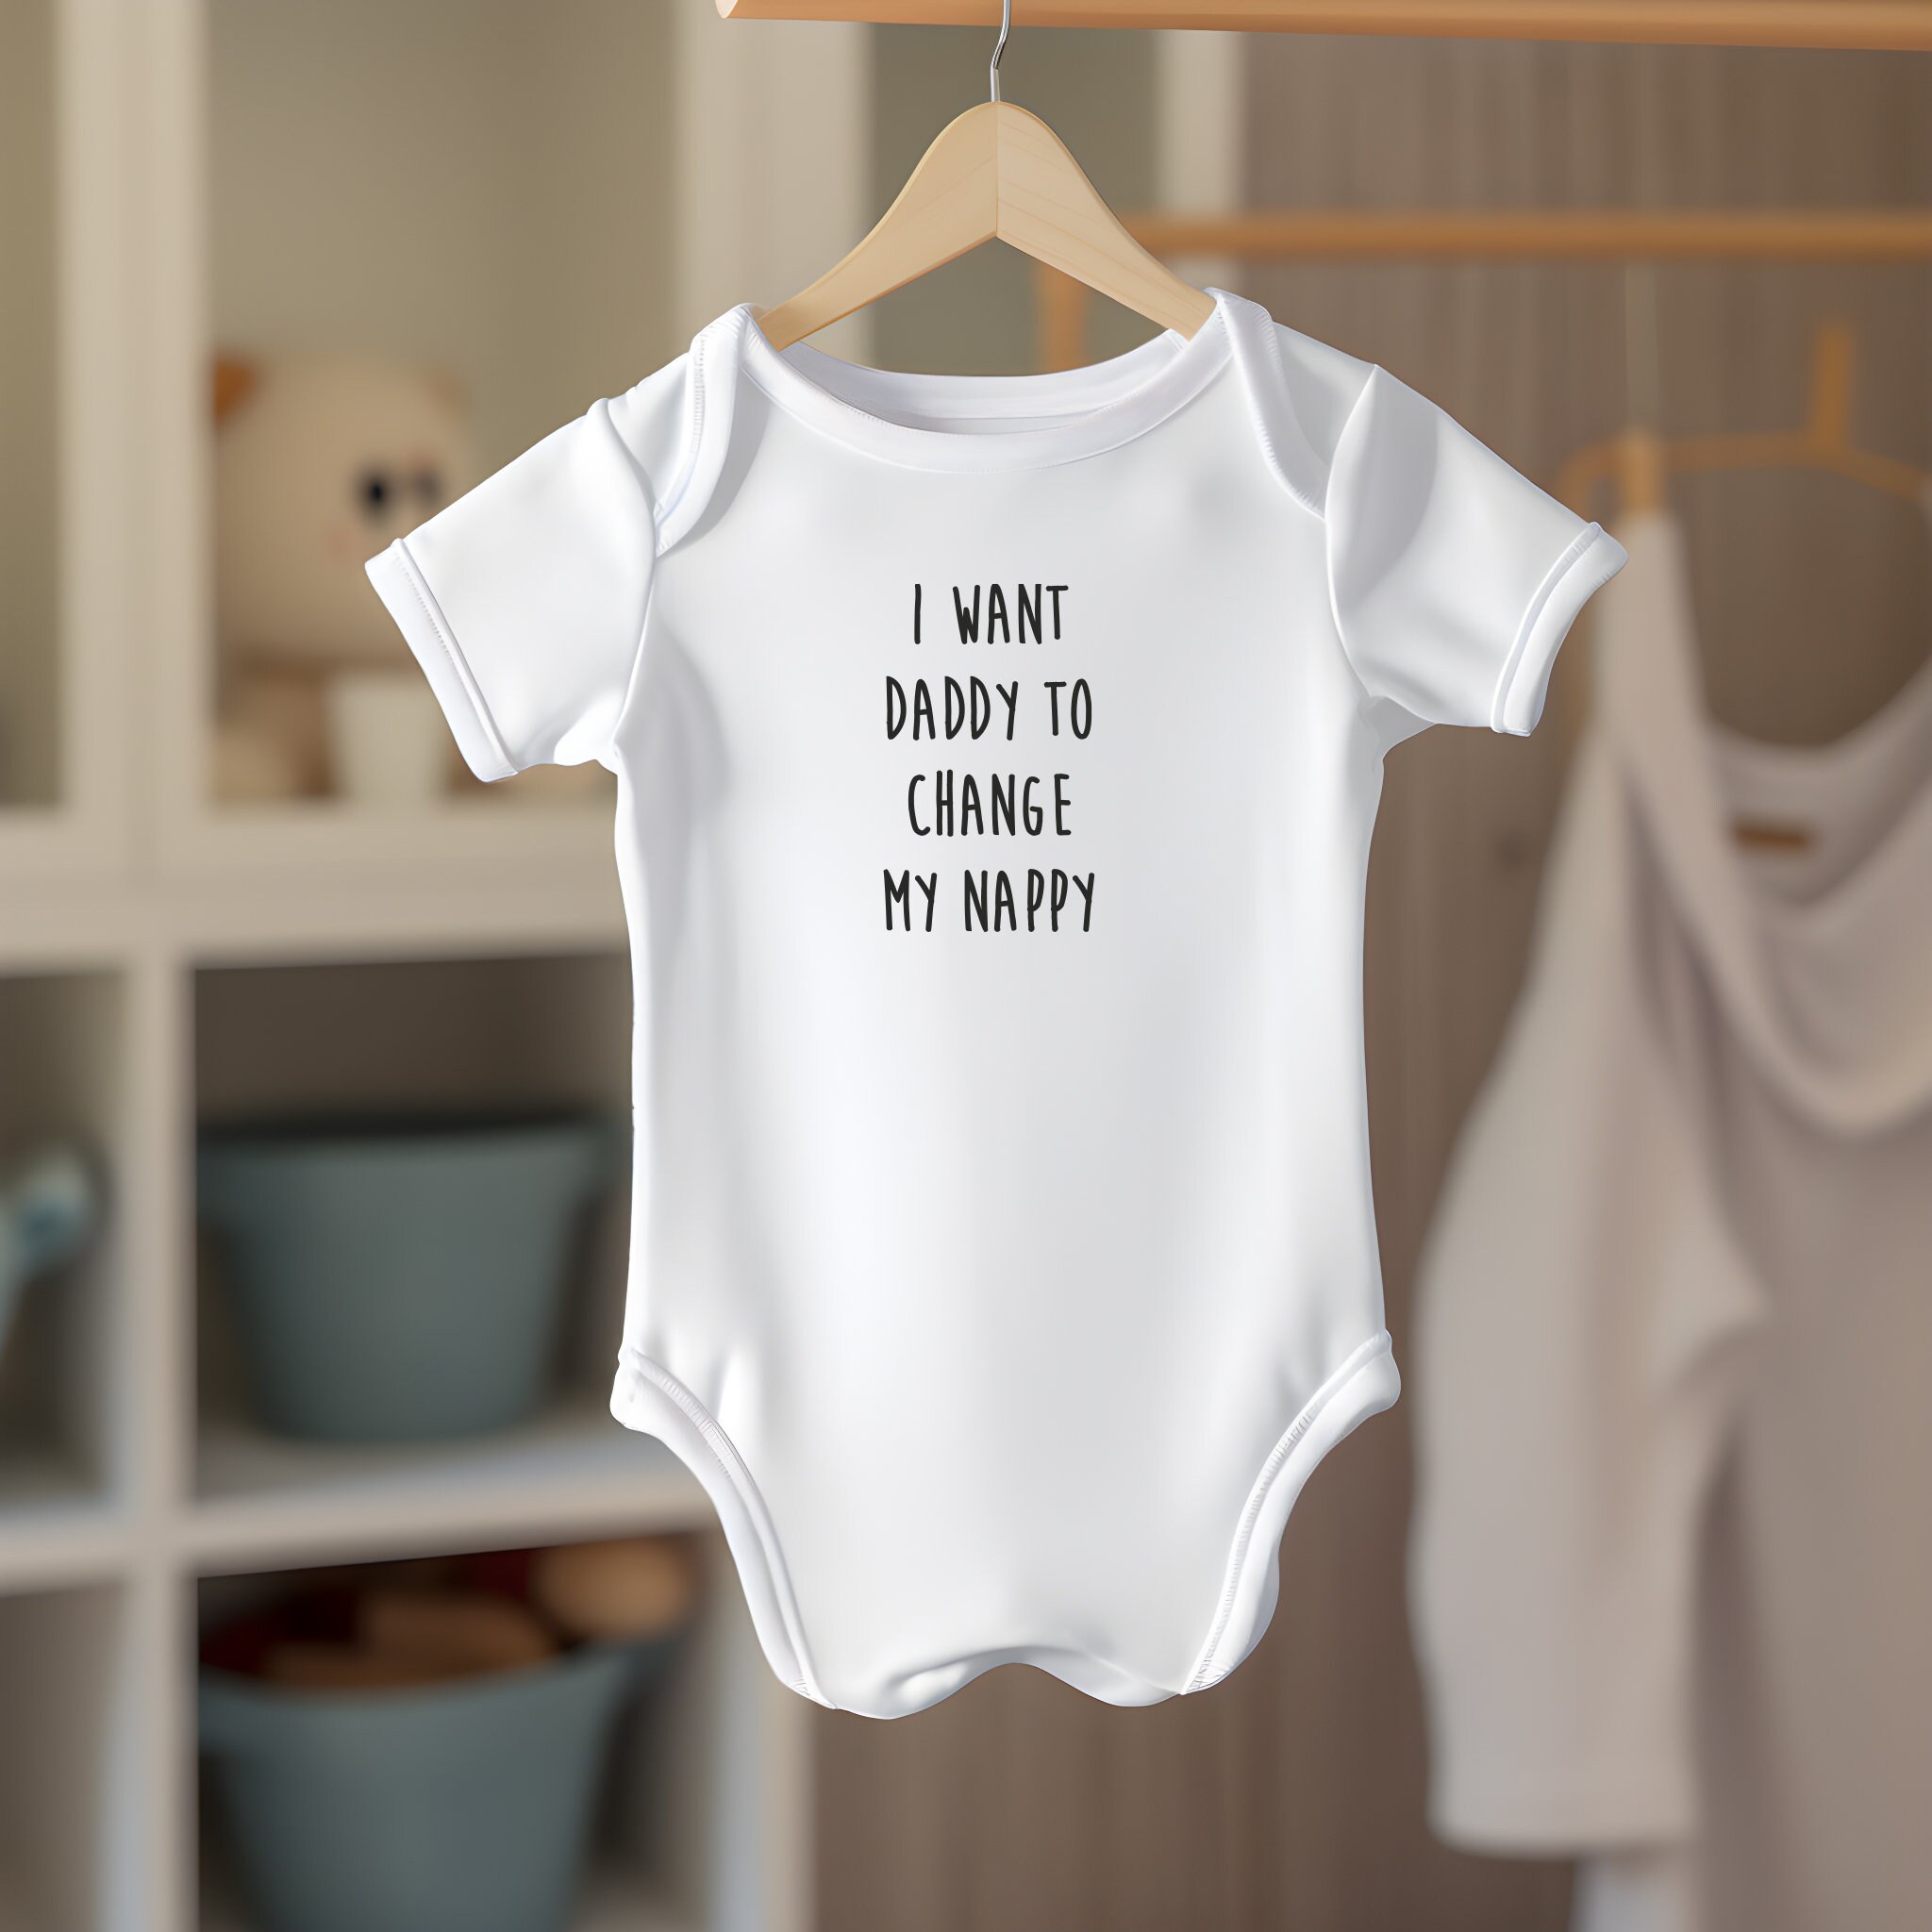 Baby Grow Funny Baby Gifts Baby Bodysuit Gift Funny Baby -  Norway